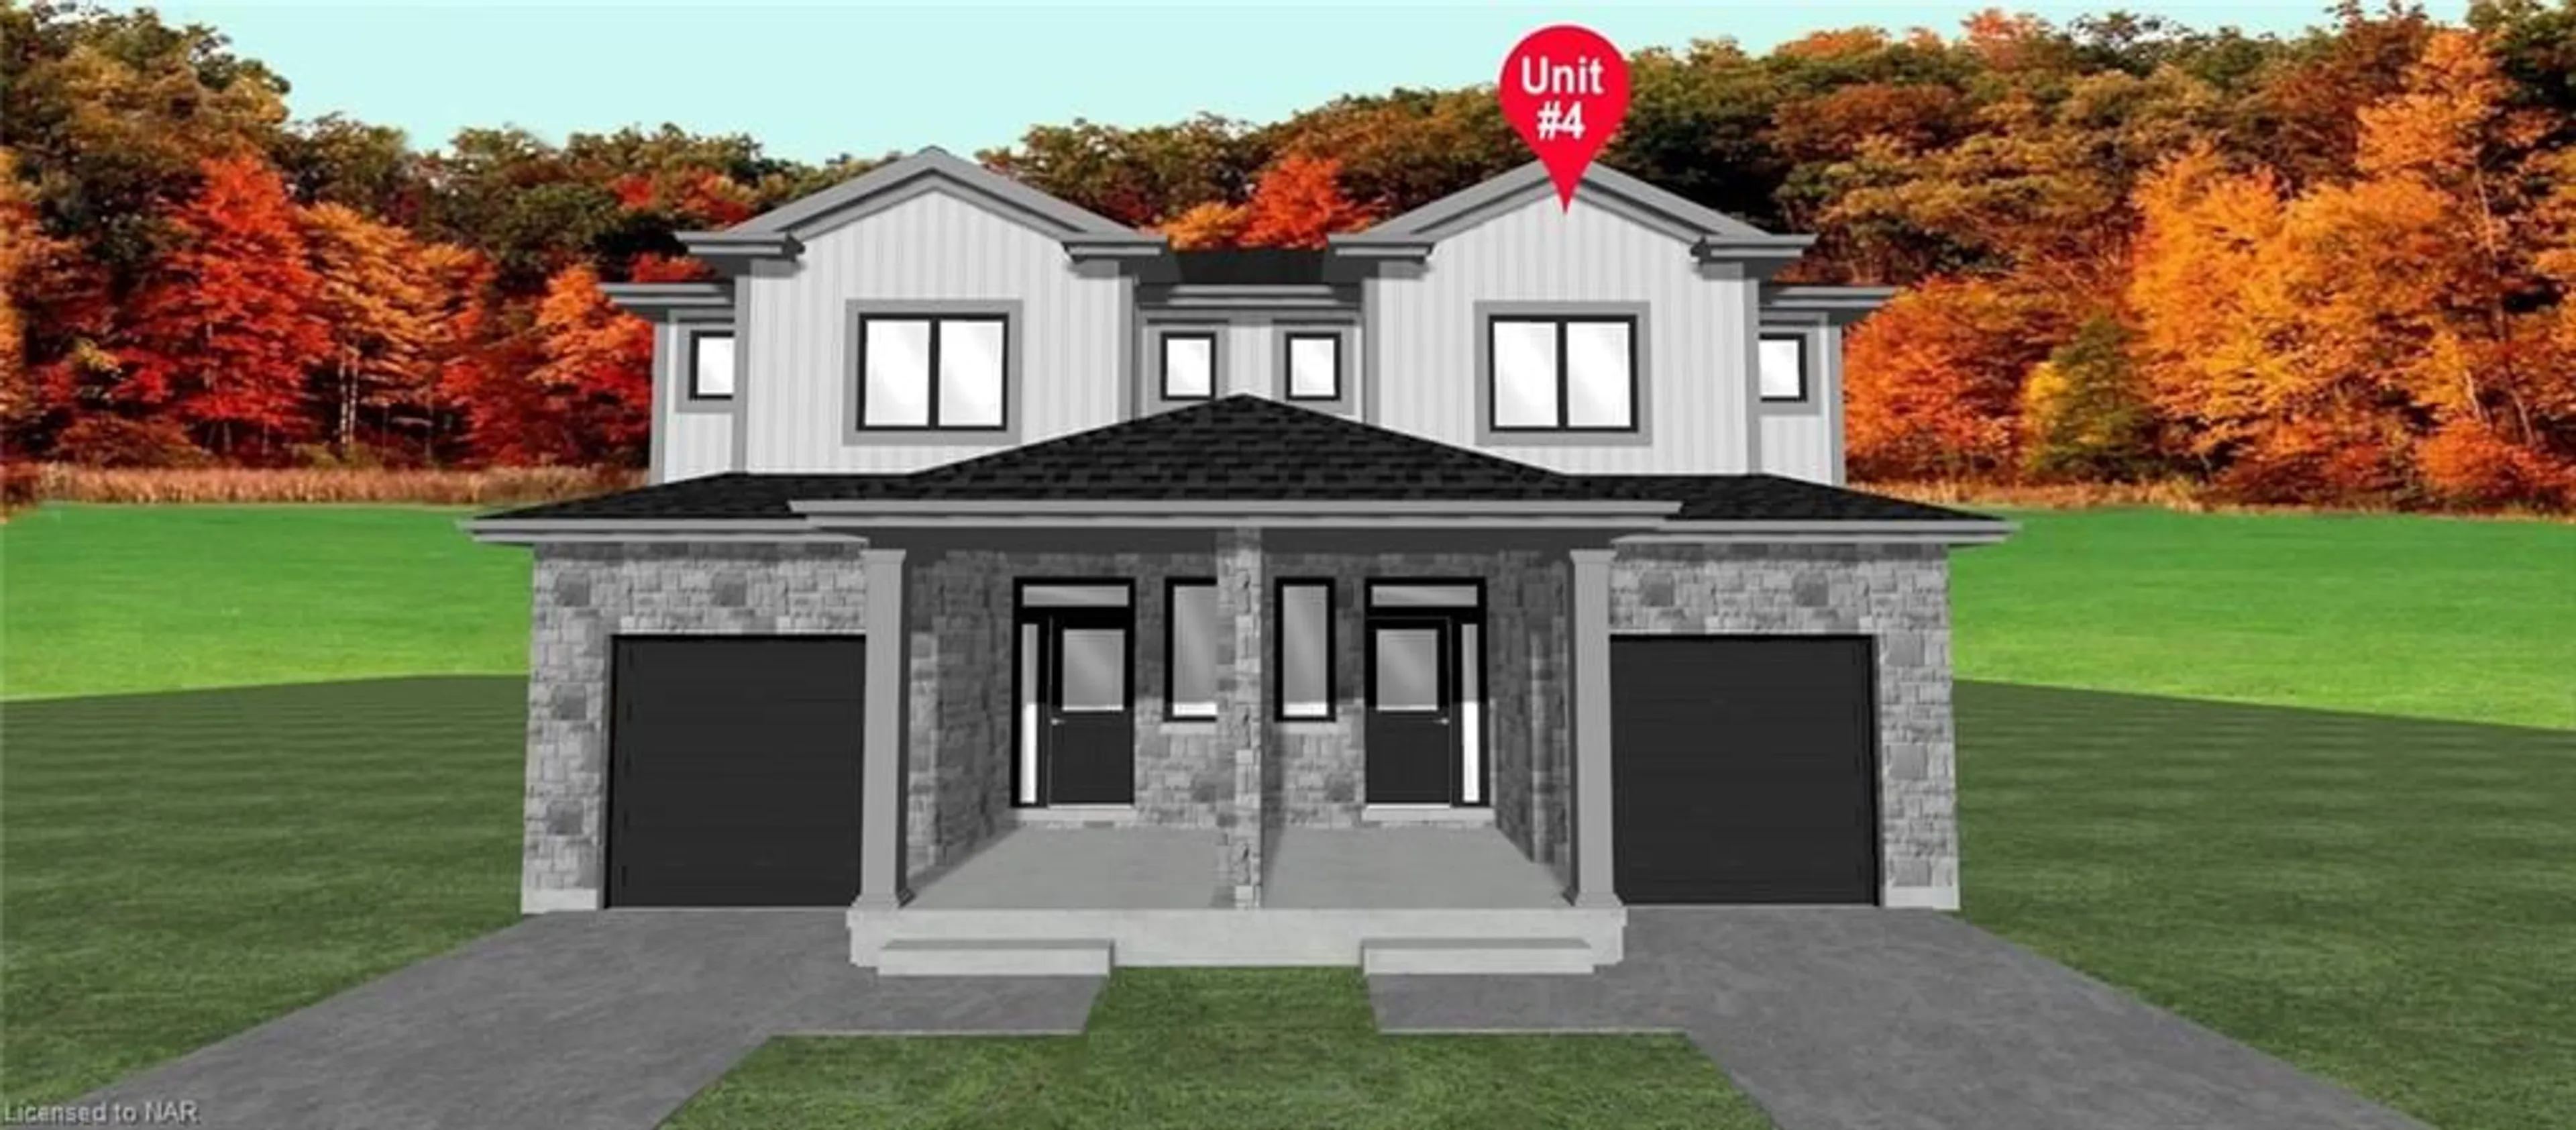 Frontside or backside of a home for 146 SOUTH Haun Rd #4, Crystal Beach Ontario L0S 1B0